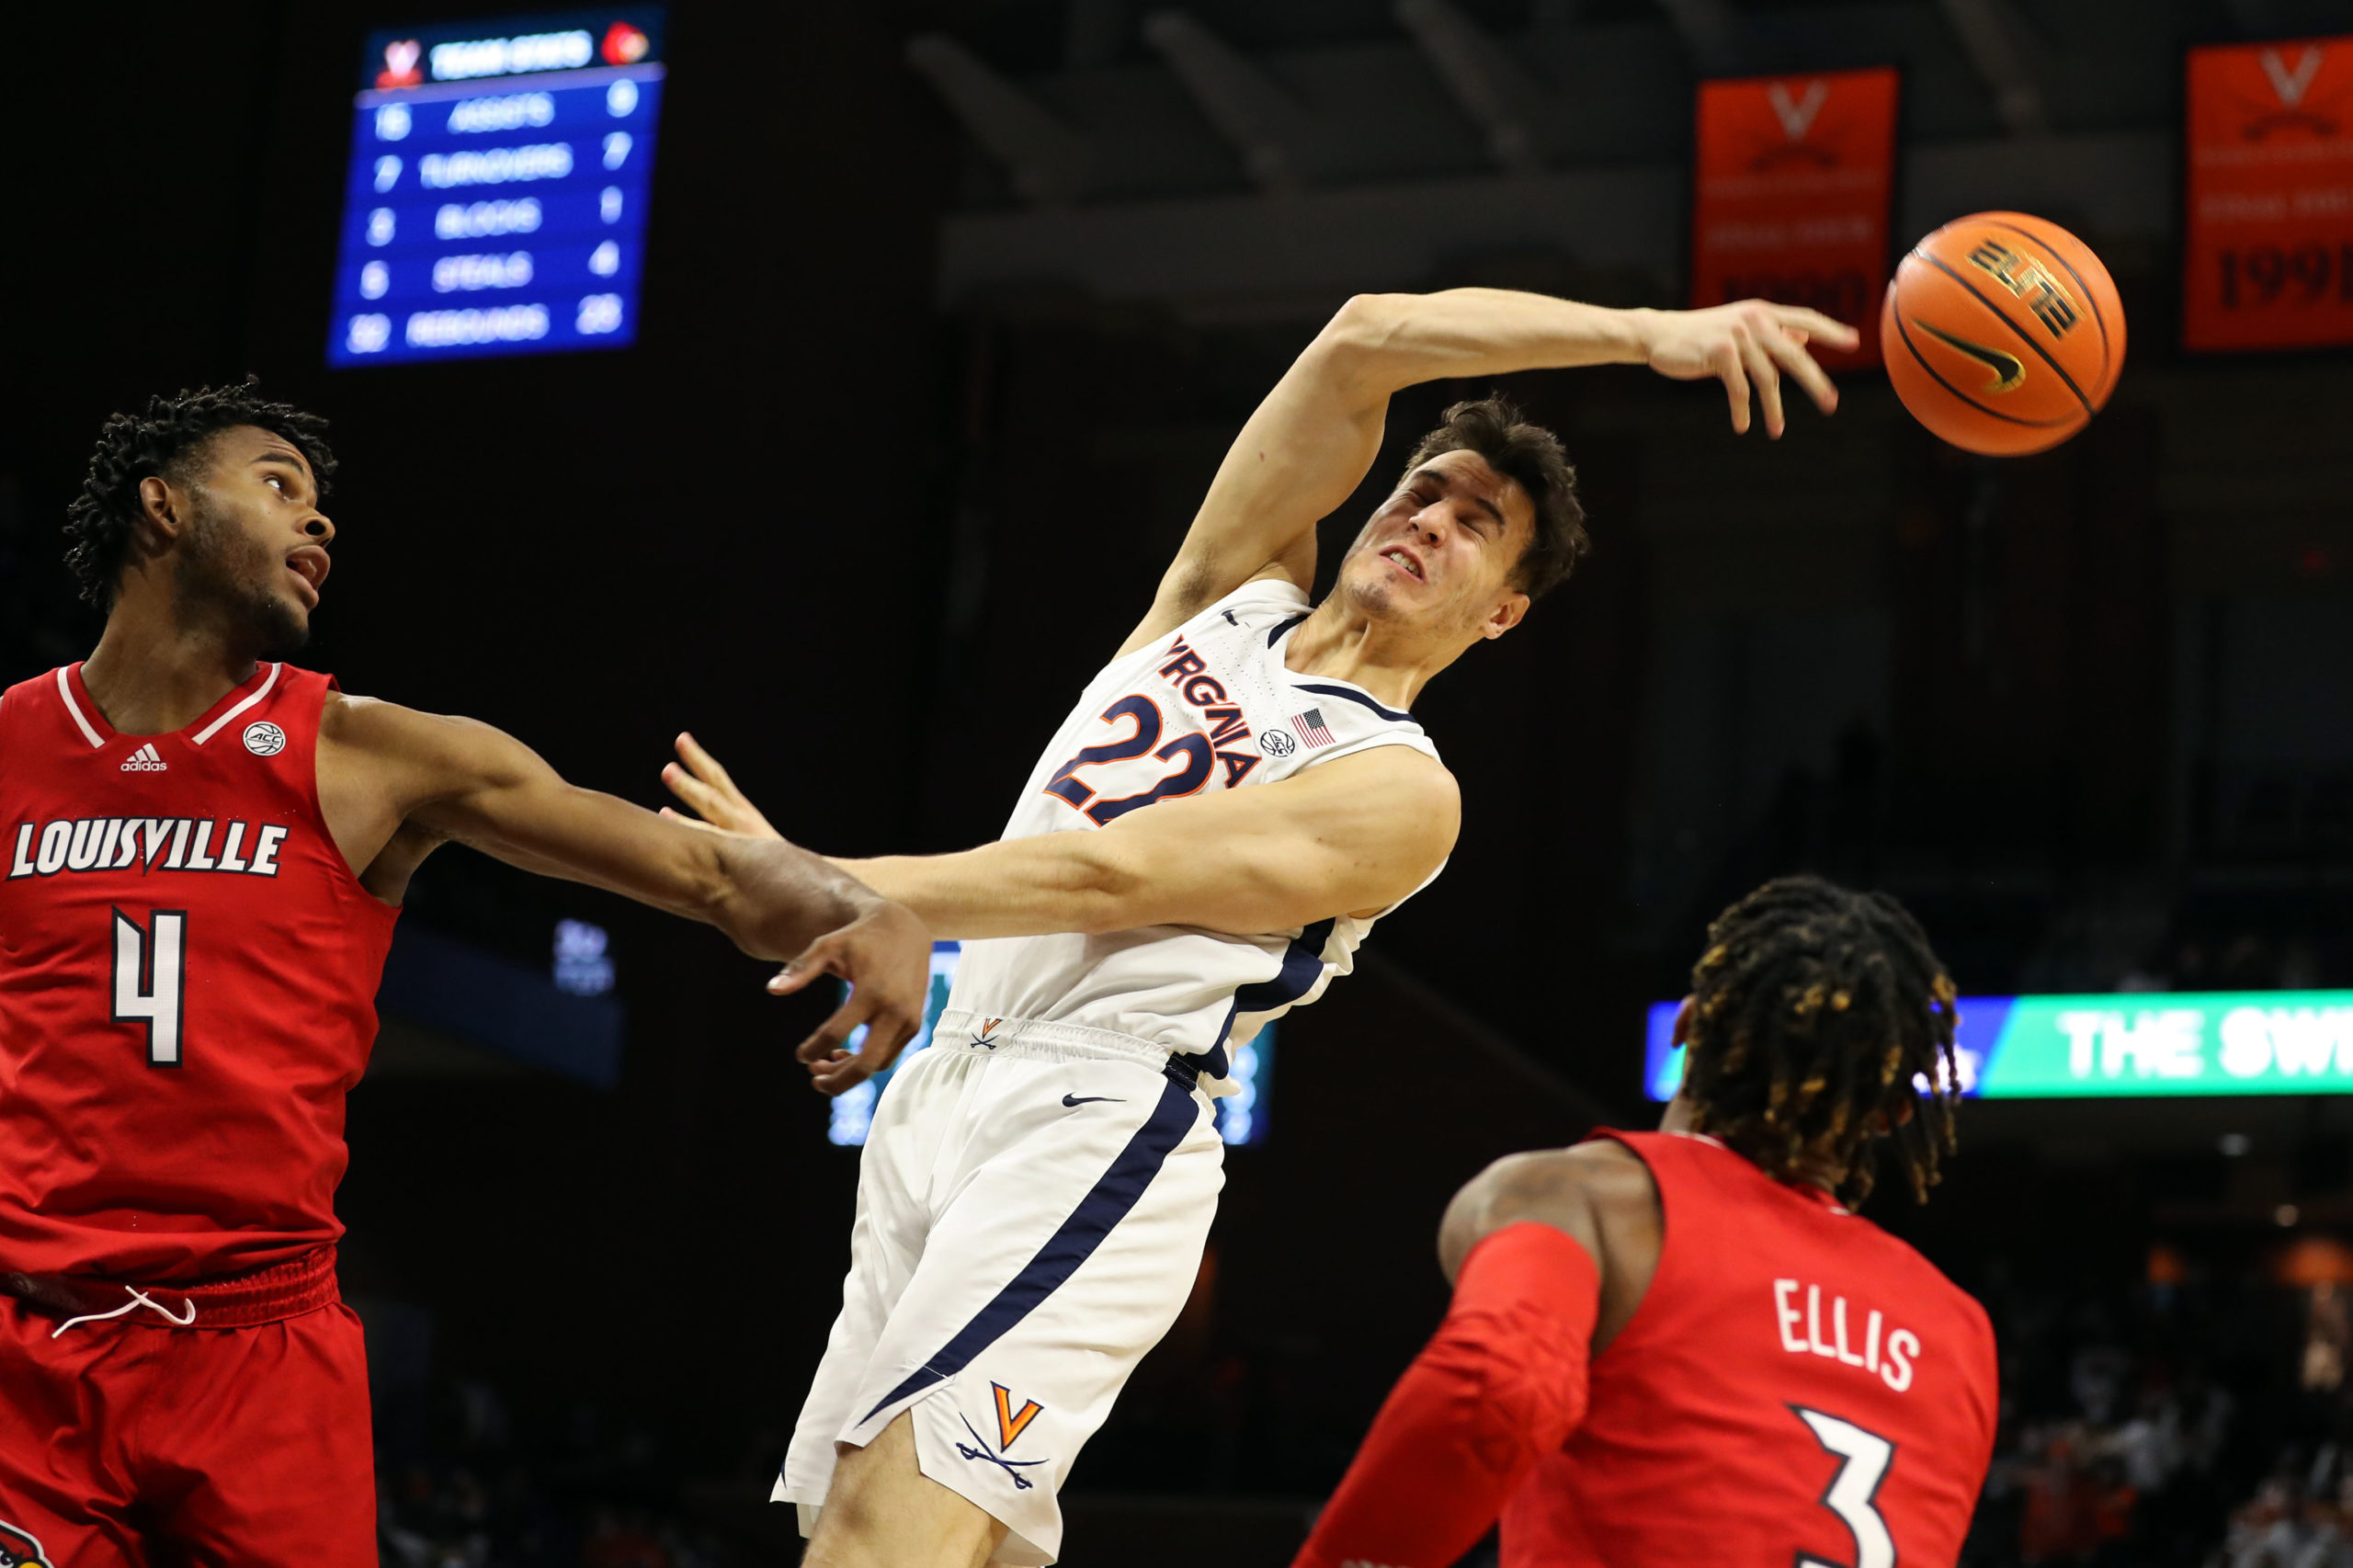 CHARLOTTESVILLE, VA - JANUARY 24: Francisco Caffaro #22 of the Virginia Cavaliers swipes a rebound away from Roosevelt Wheeler #4 of the Louisville Cardinals in the second half during a game at John Paul Jones Arena on January 24, 2022 in Charlottesville, Virginia. (Photo by Ryan M. Kelly/Getty Images)